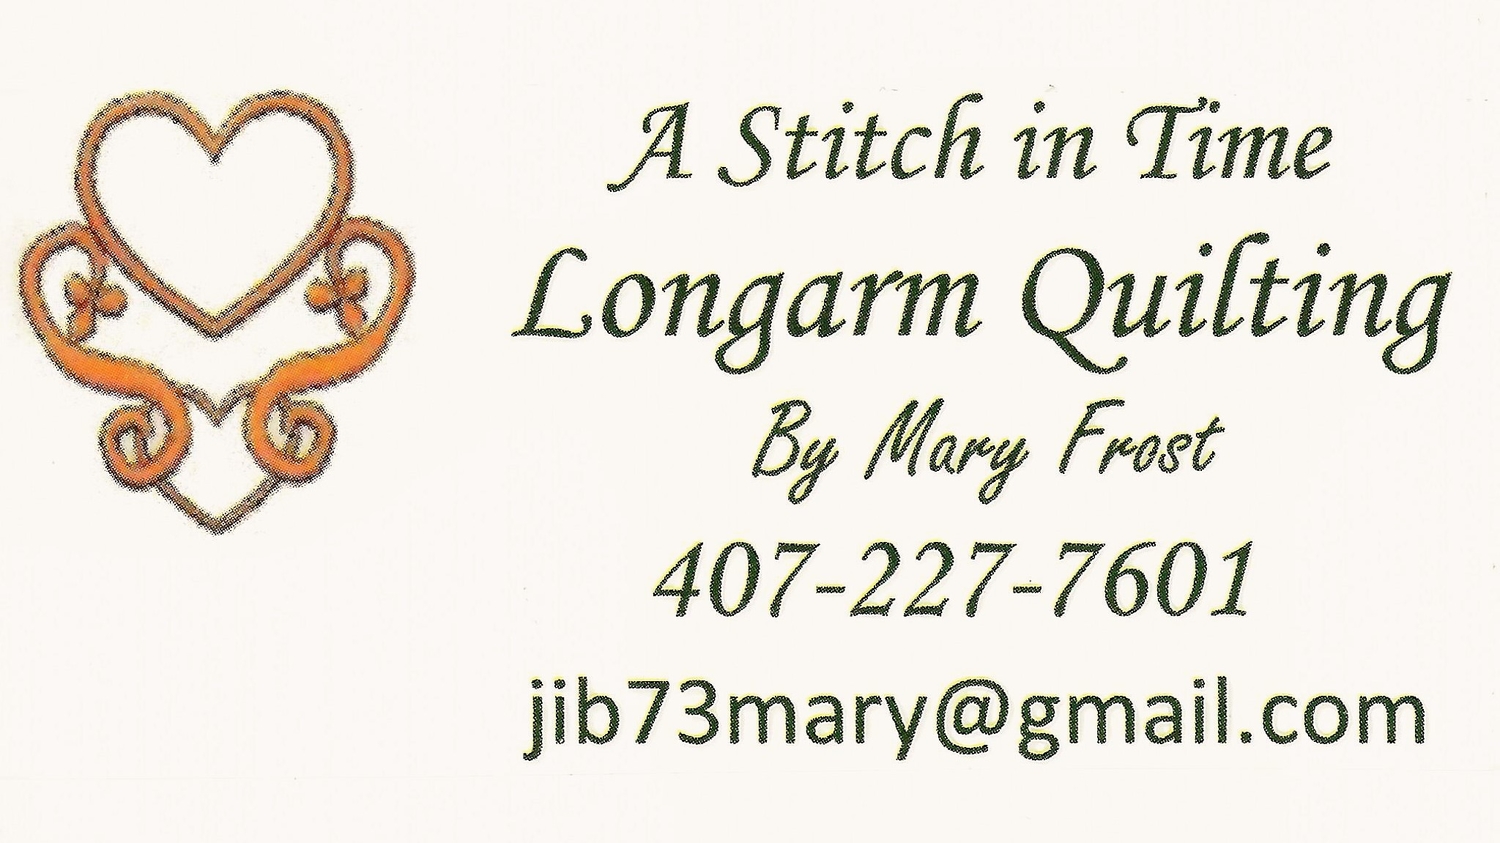 A Stitch in Time Longarm Quilting by Mary Frost